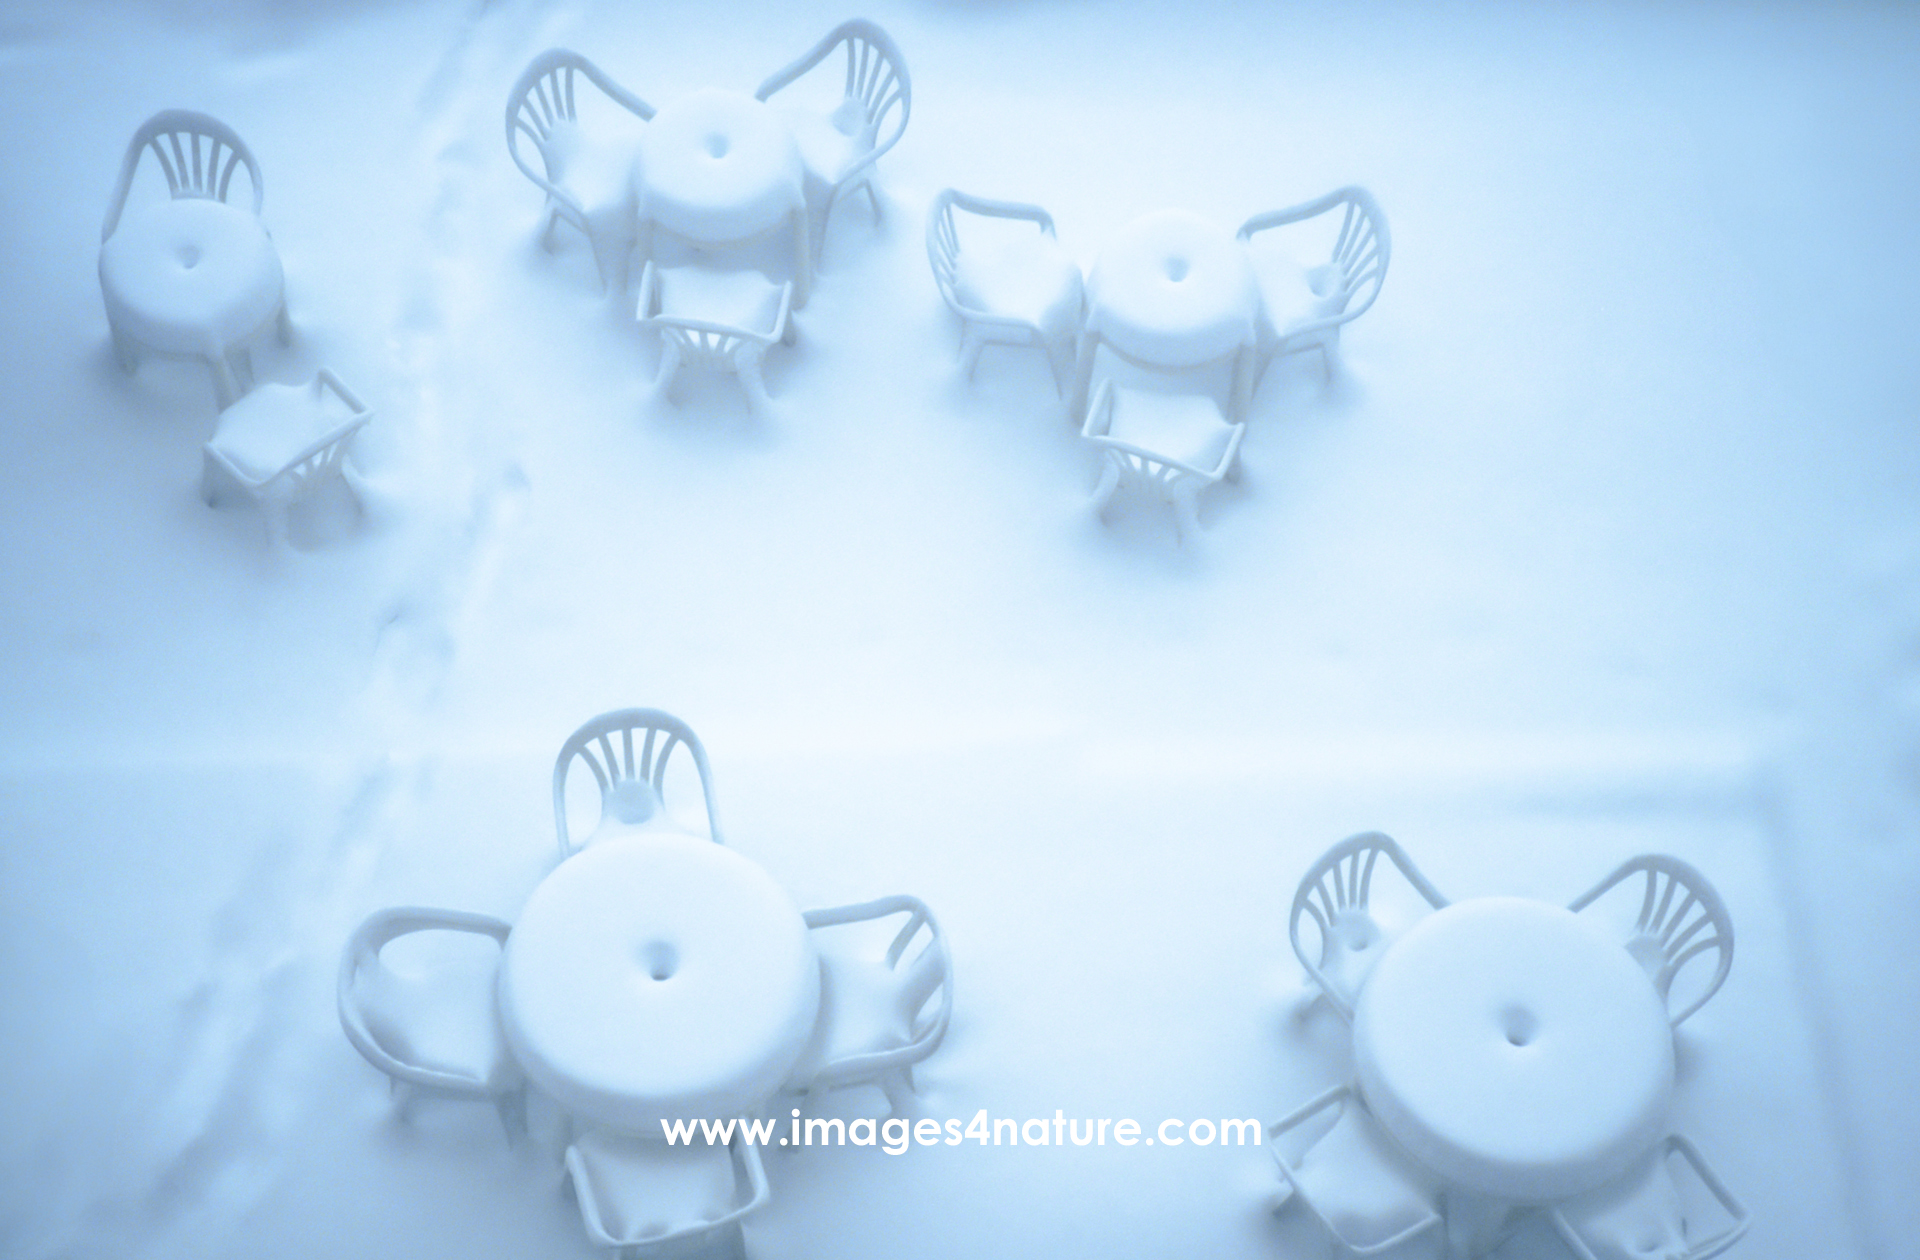 Four white plastic tables and chairs fully covered by fresh snow